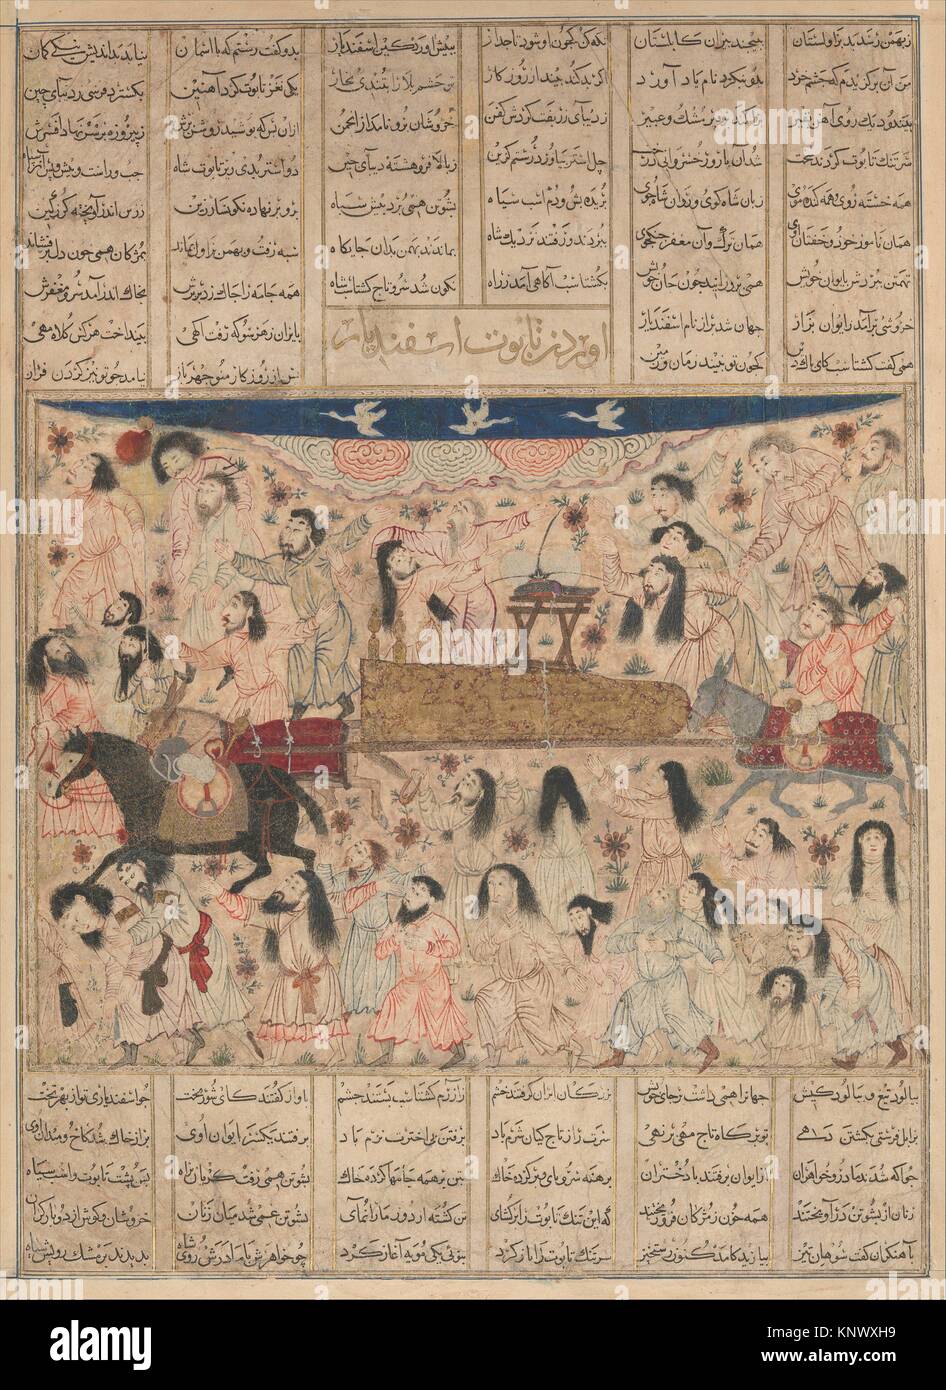 The Funeral of Isfandiyar, Folio from a Shahnama (Book of Kings). Author: Abu´l Qasim Firdausi (935-1020); Object Name: Folio from an illustrated Stock Photo